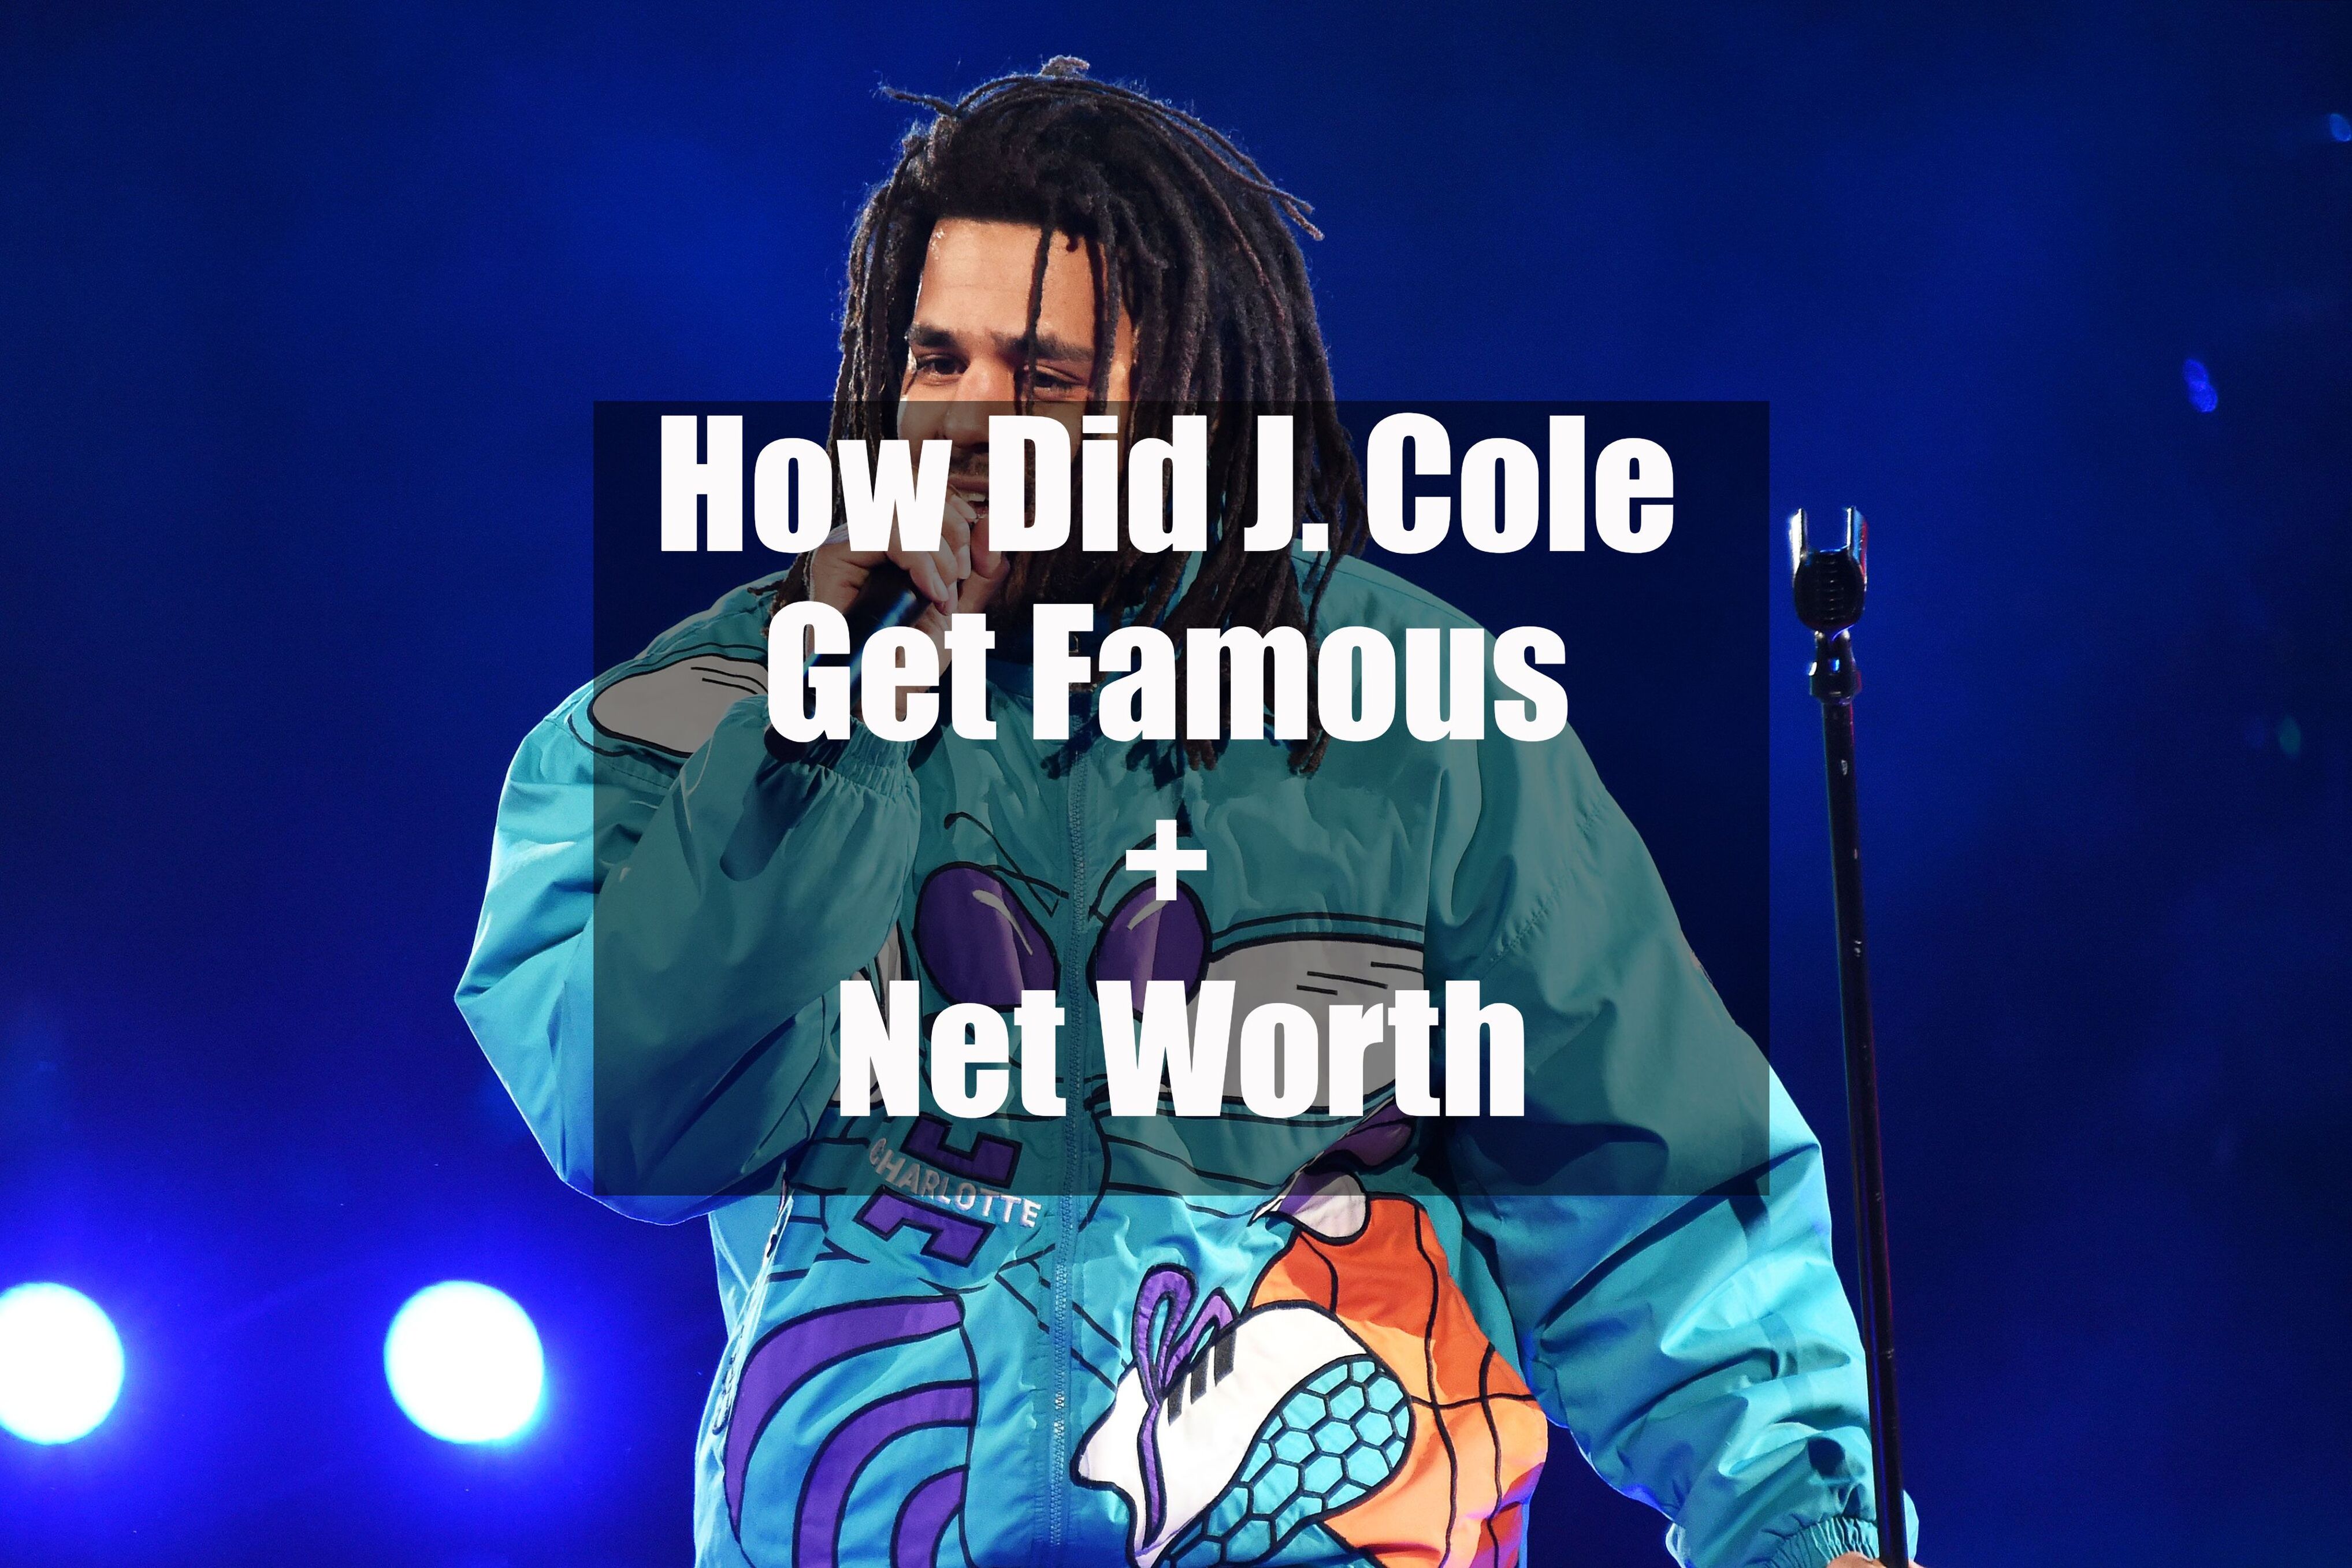 How Did J. Cole Get Famous + Net Worth